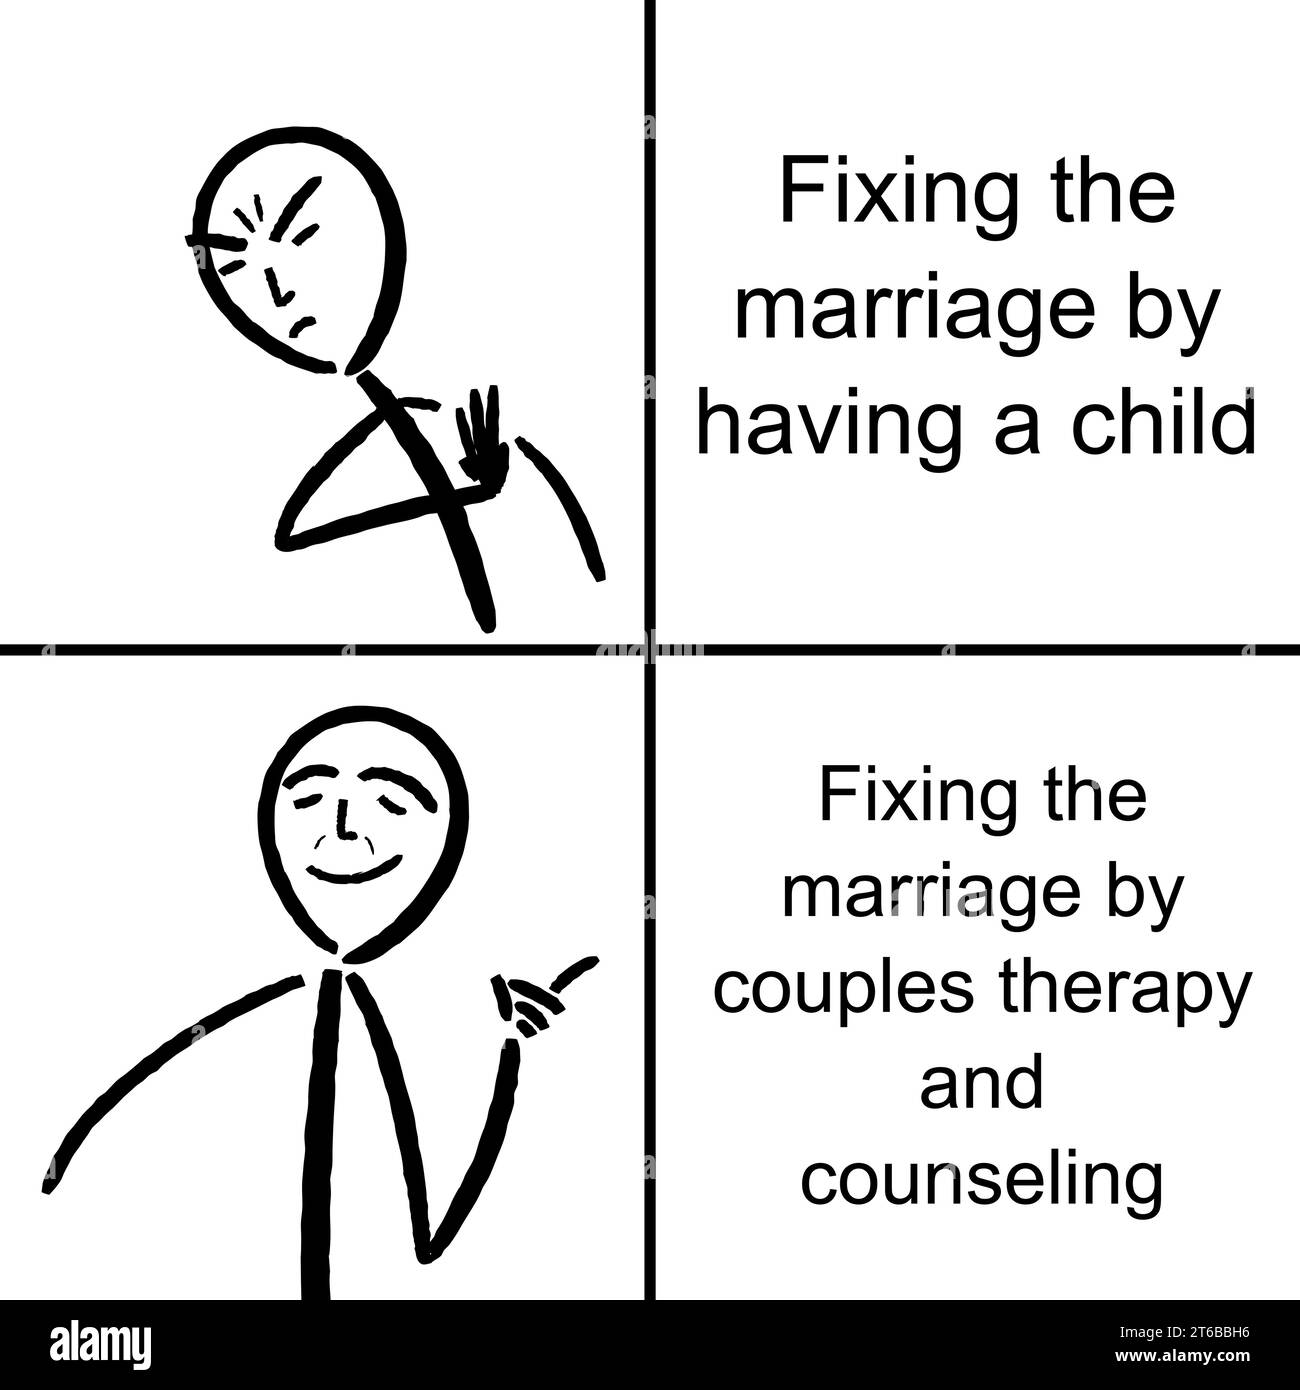 Fixing the marriage by having a child - relationship problem. Funny meme for social media sharing. Stock Vector